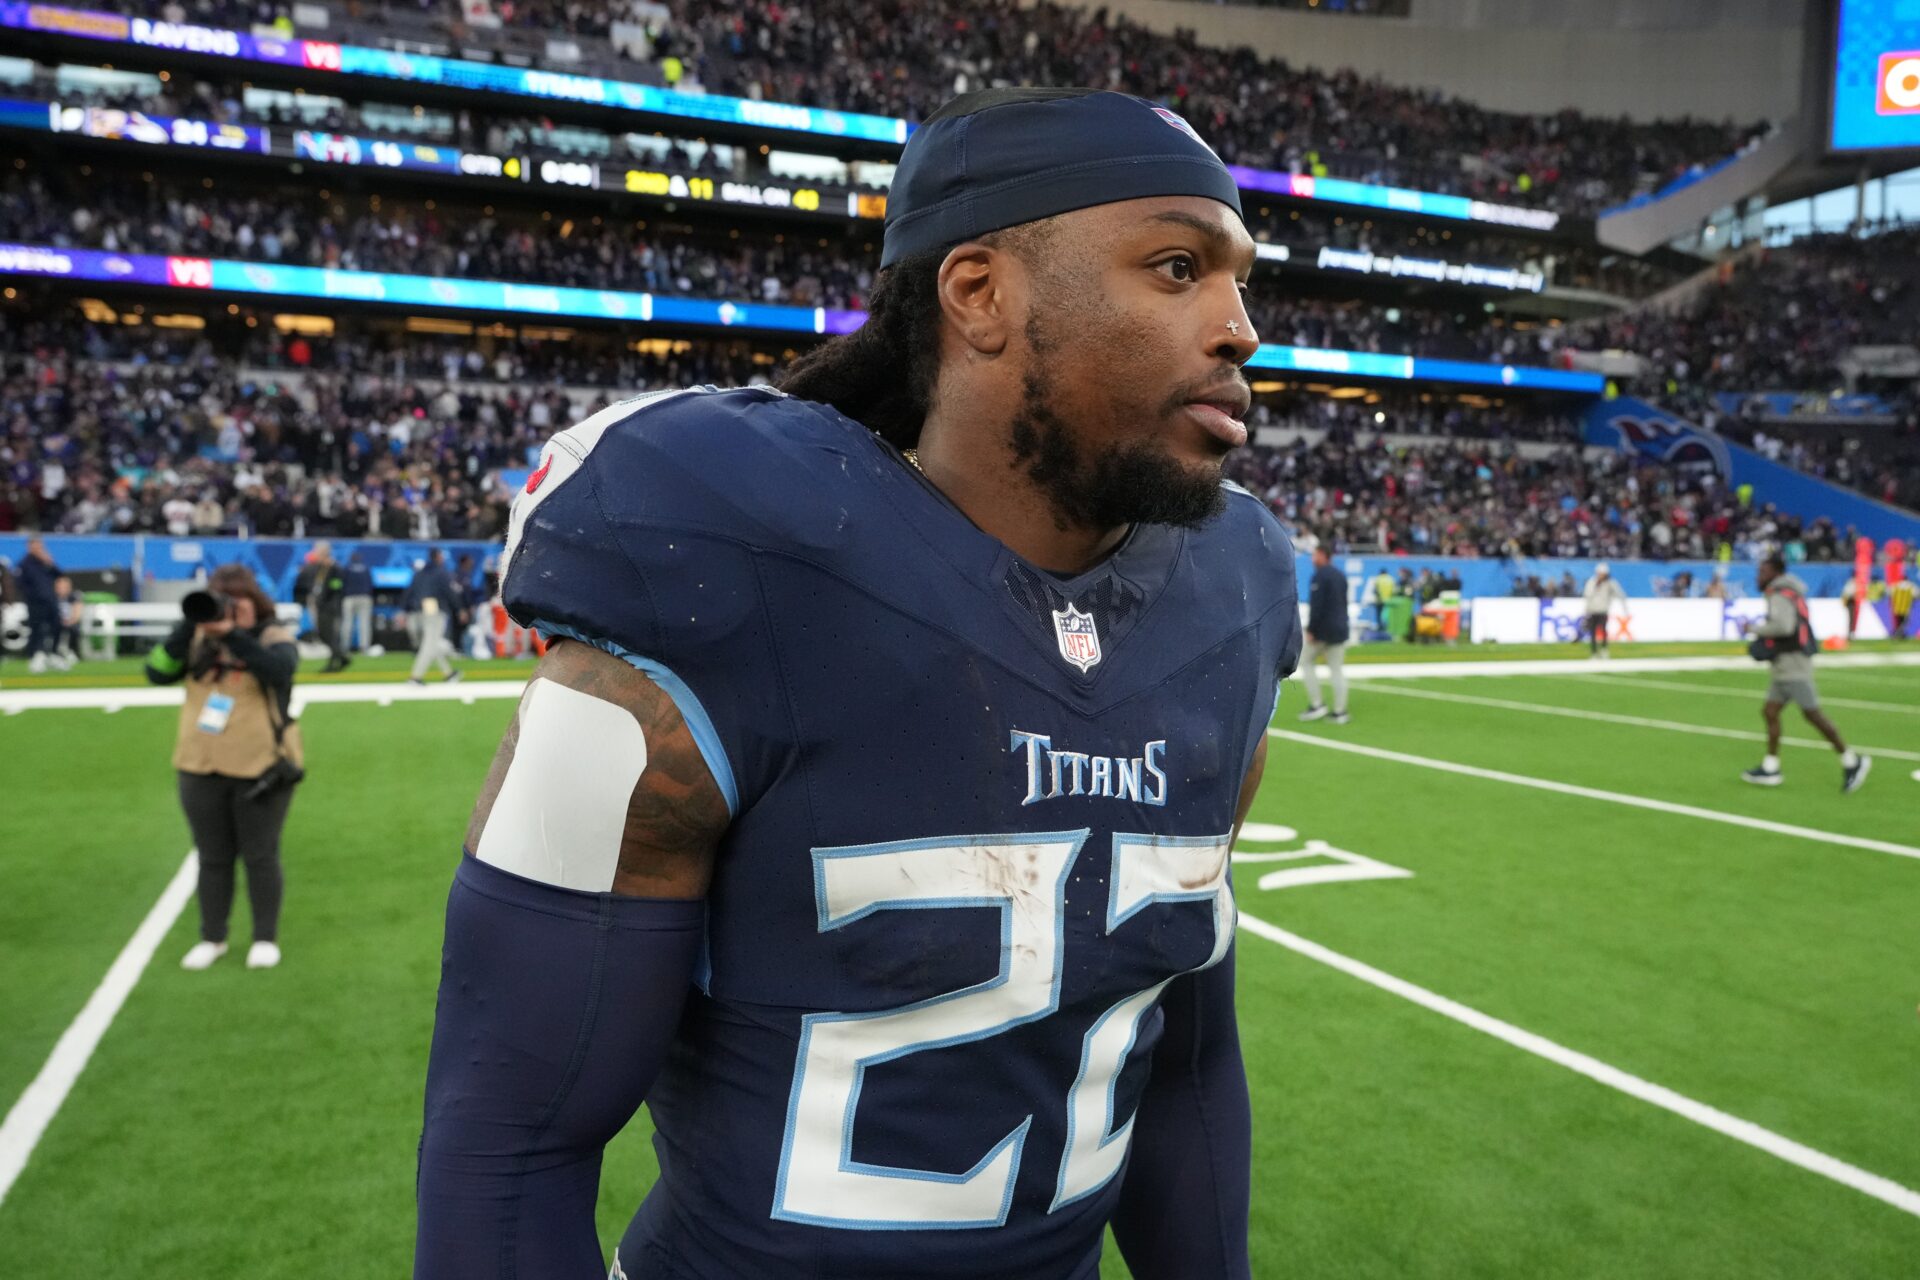 Tennessee Titans running back Derrick Henry (22) leaves the field after an NFL International Series game against the Baltimore Ravens at Tottenham Hotspur Stadium.